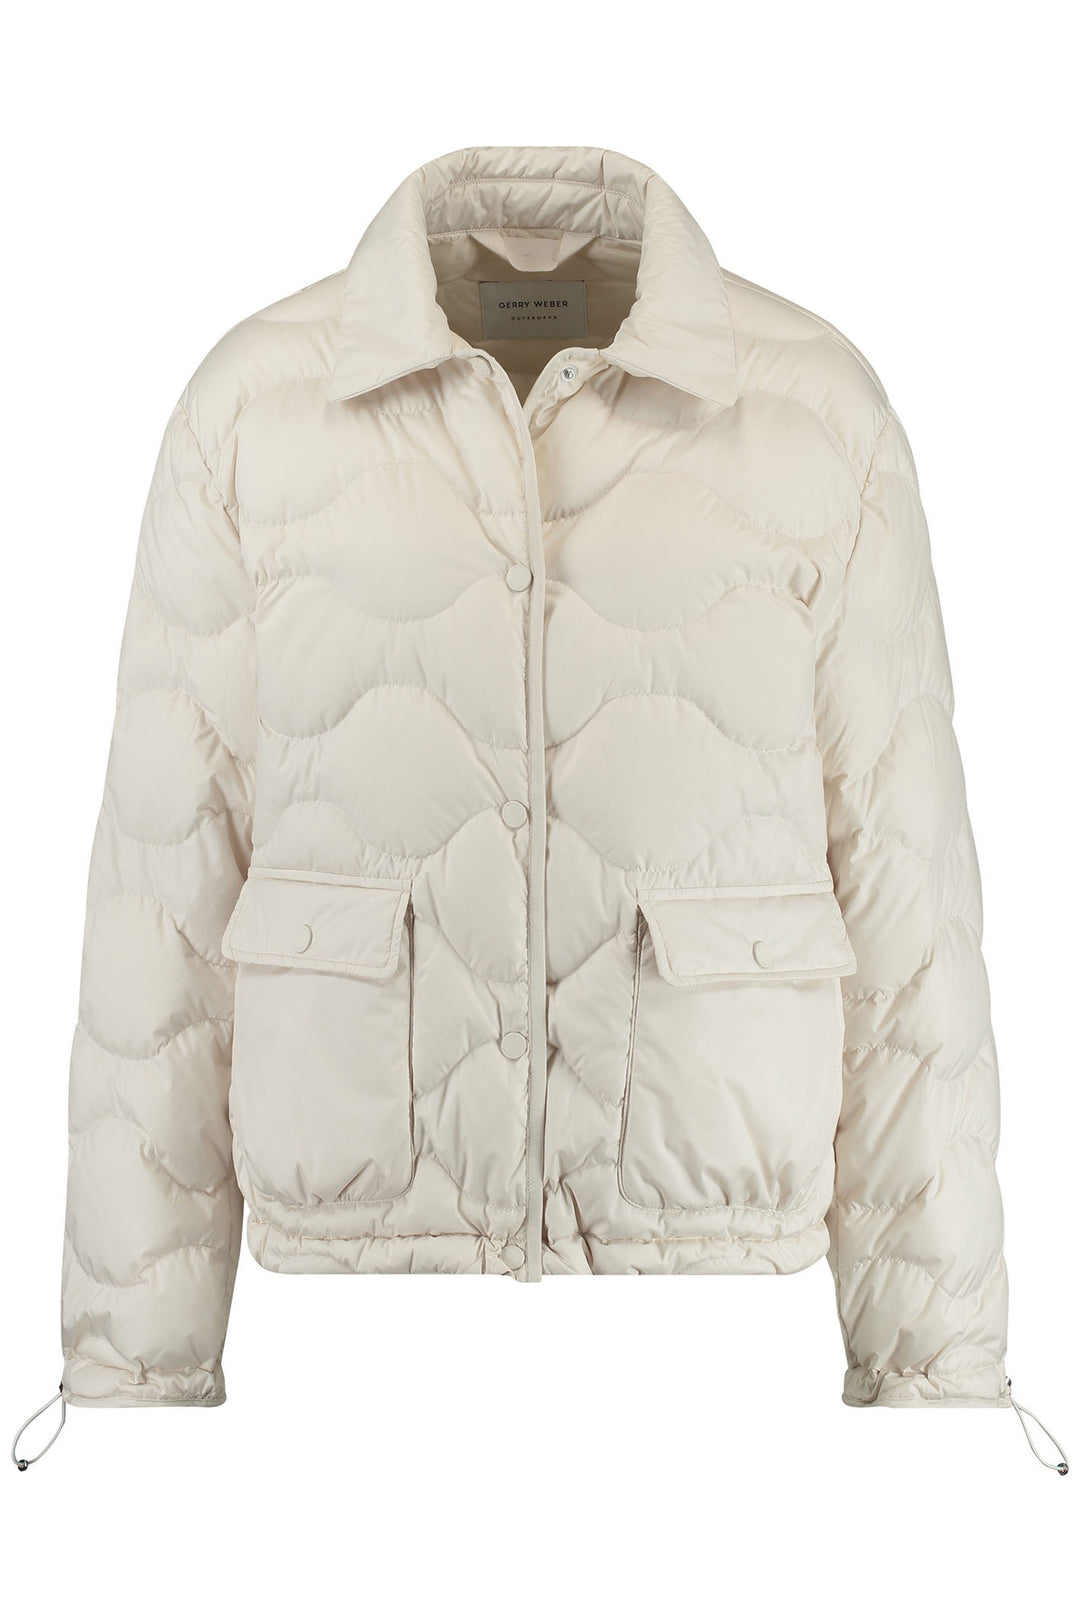 Gerry Weber 350232-31196 Cream Quilted Jacket - Dotique Chesterfield